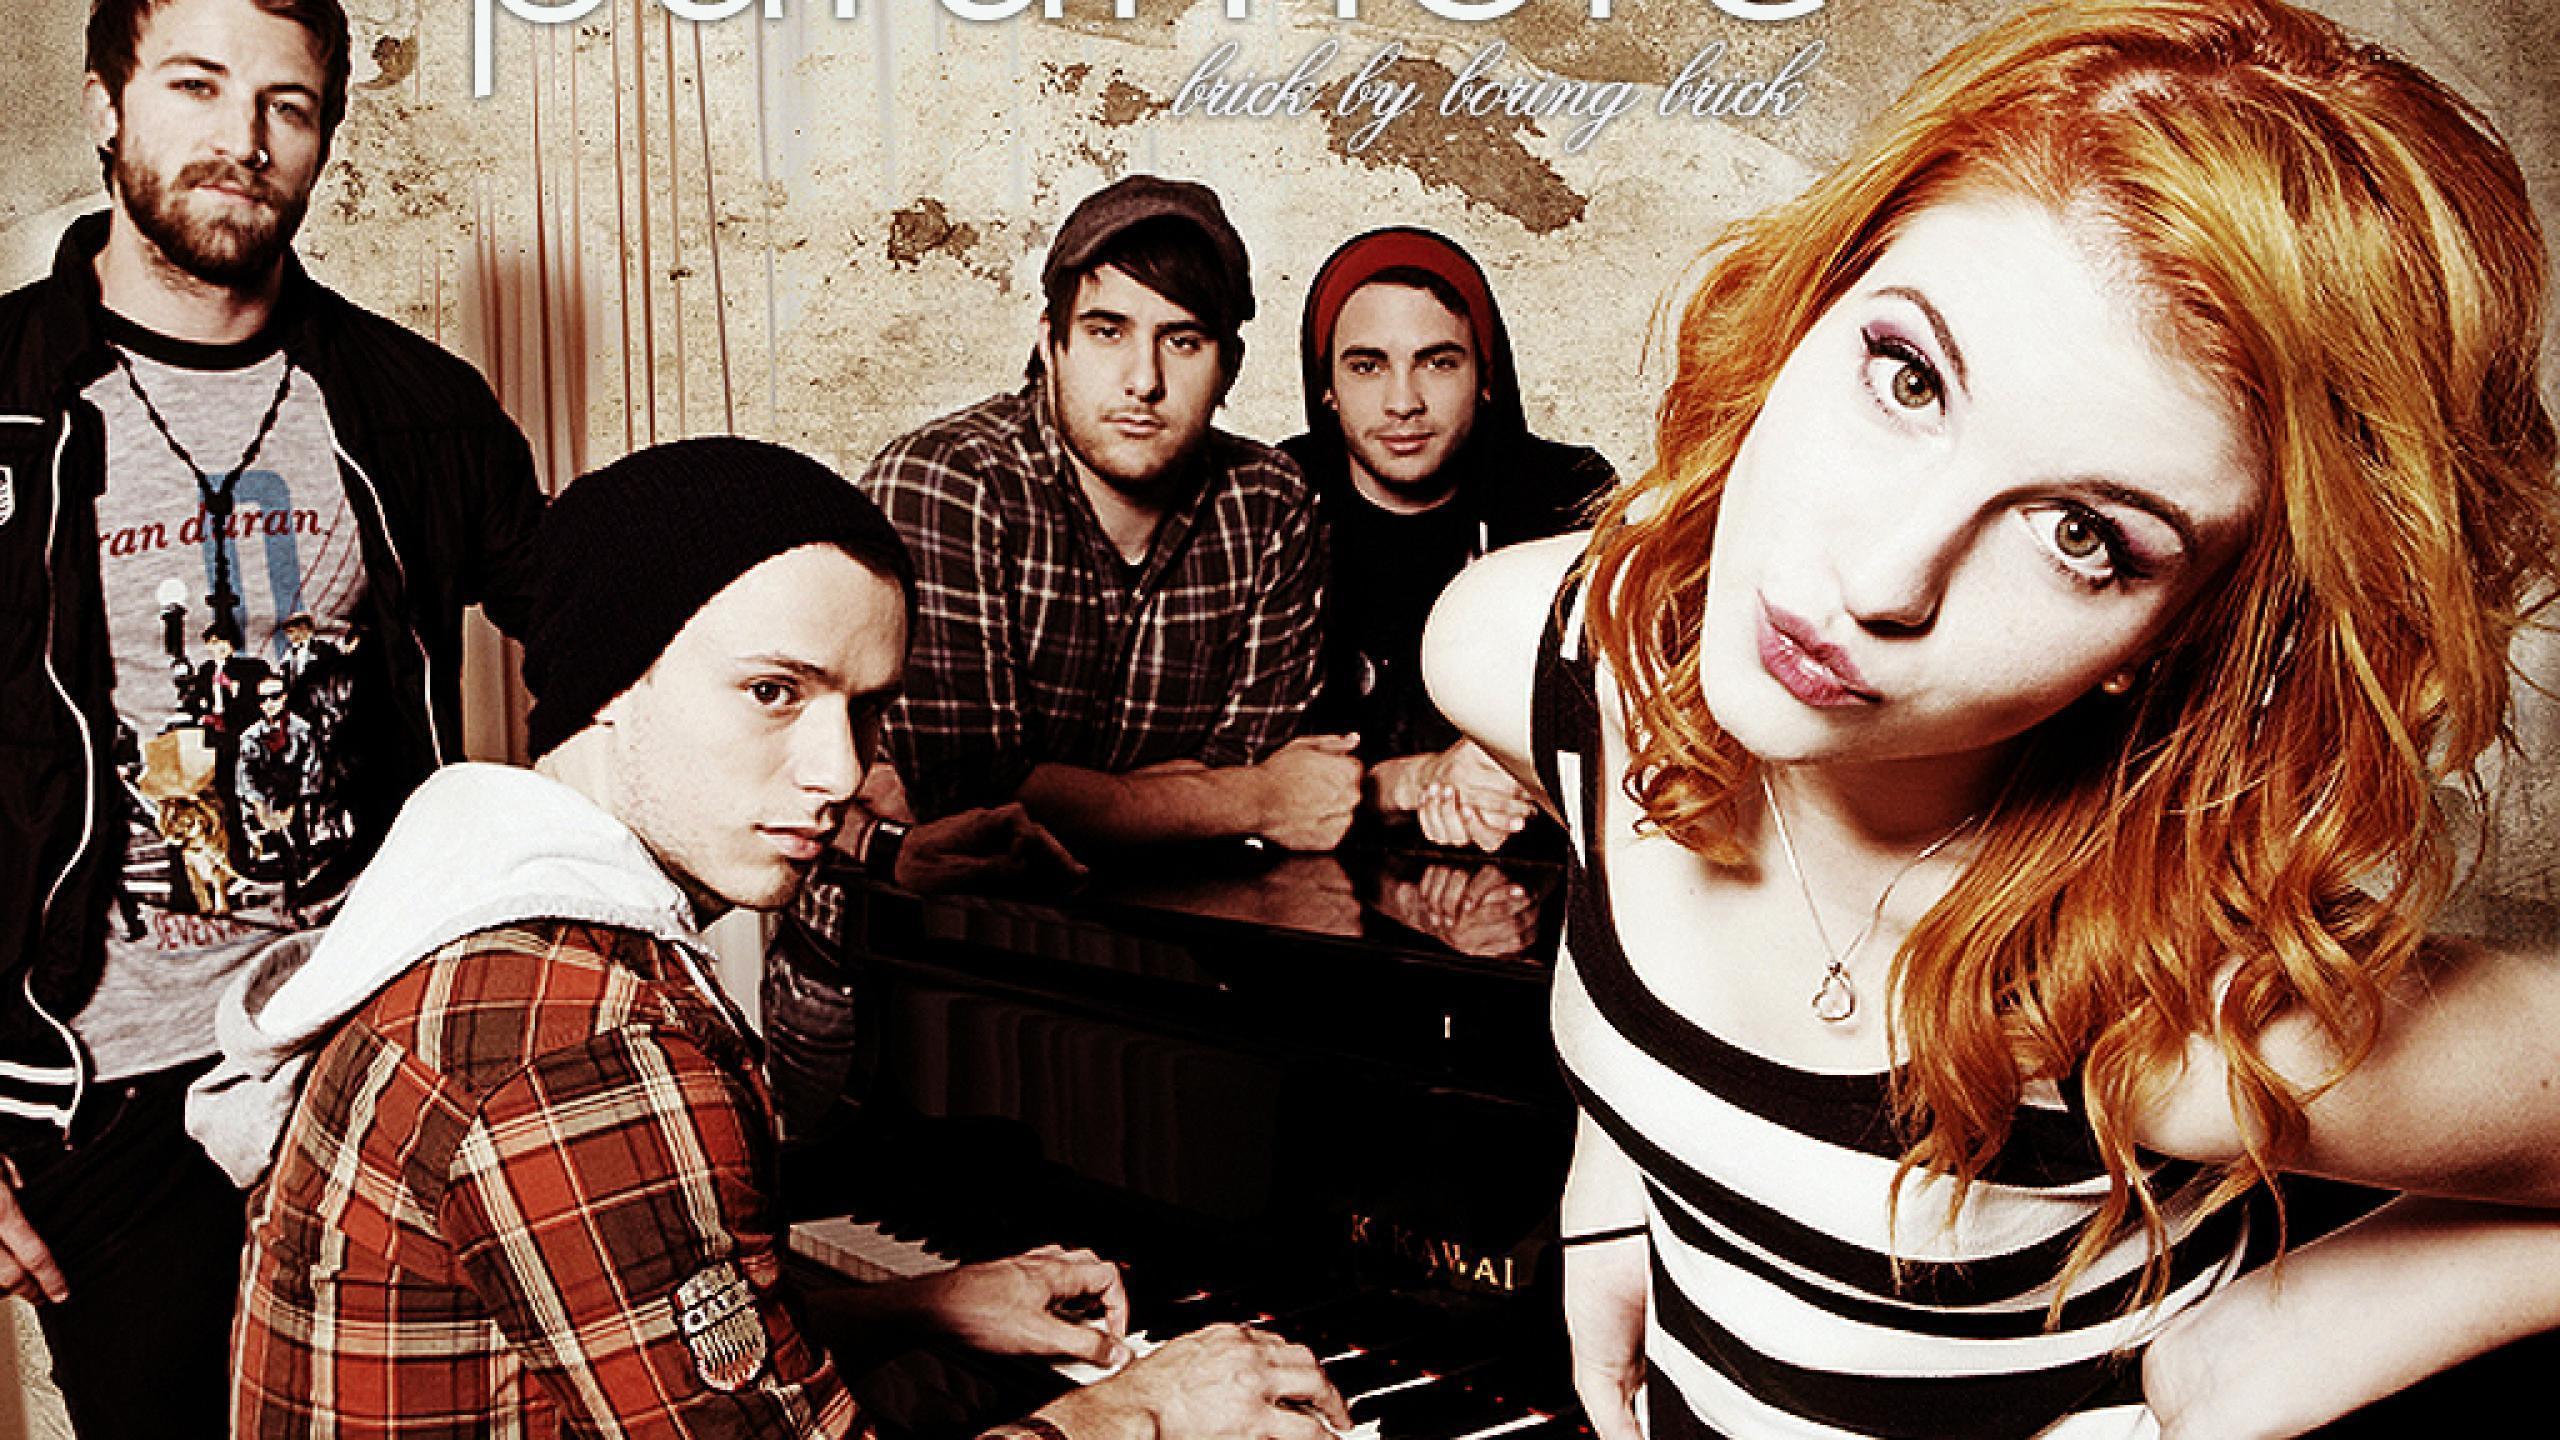 download paramore everywhere